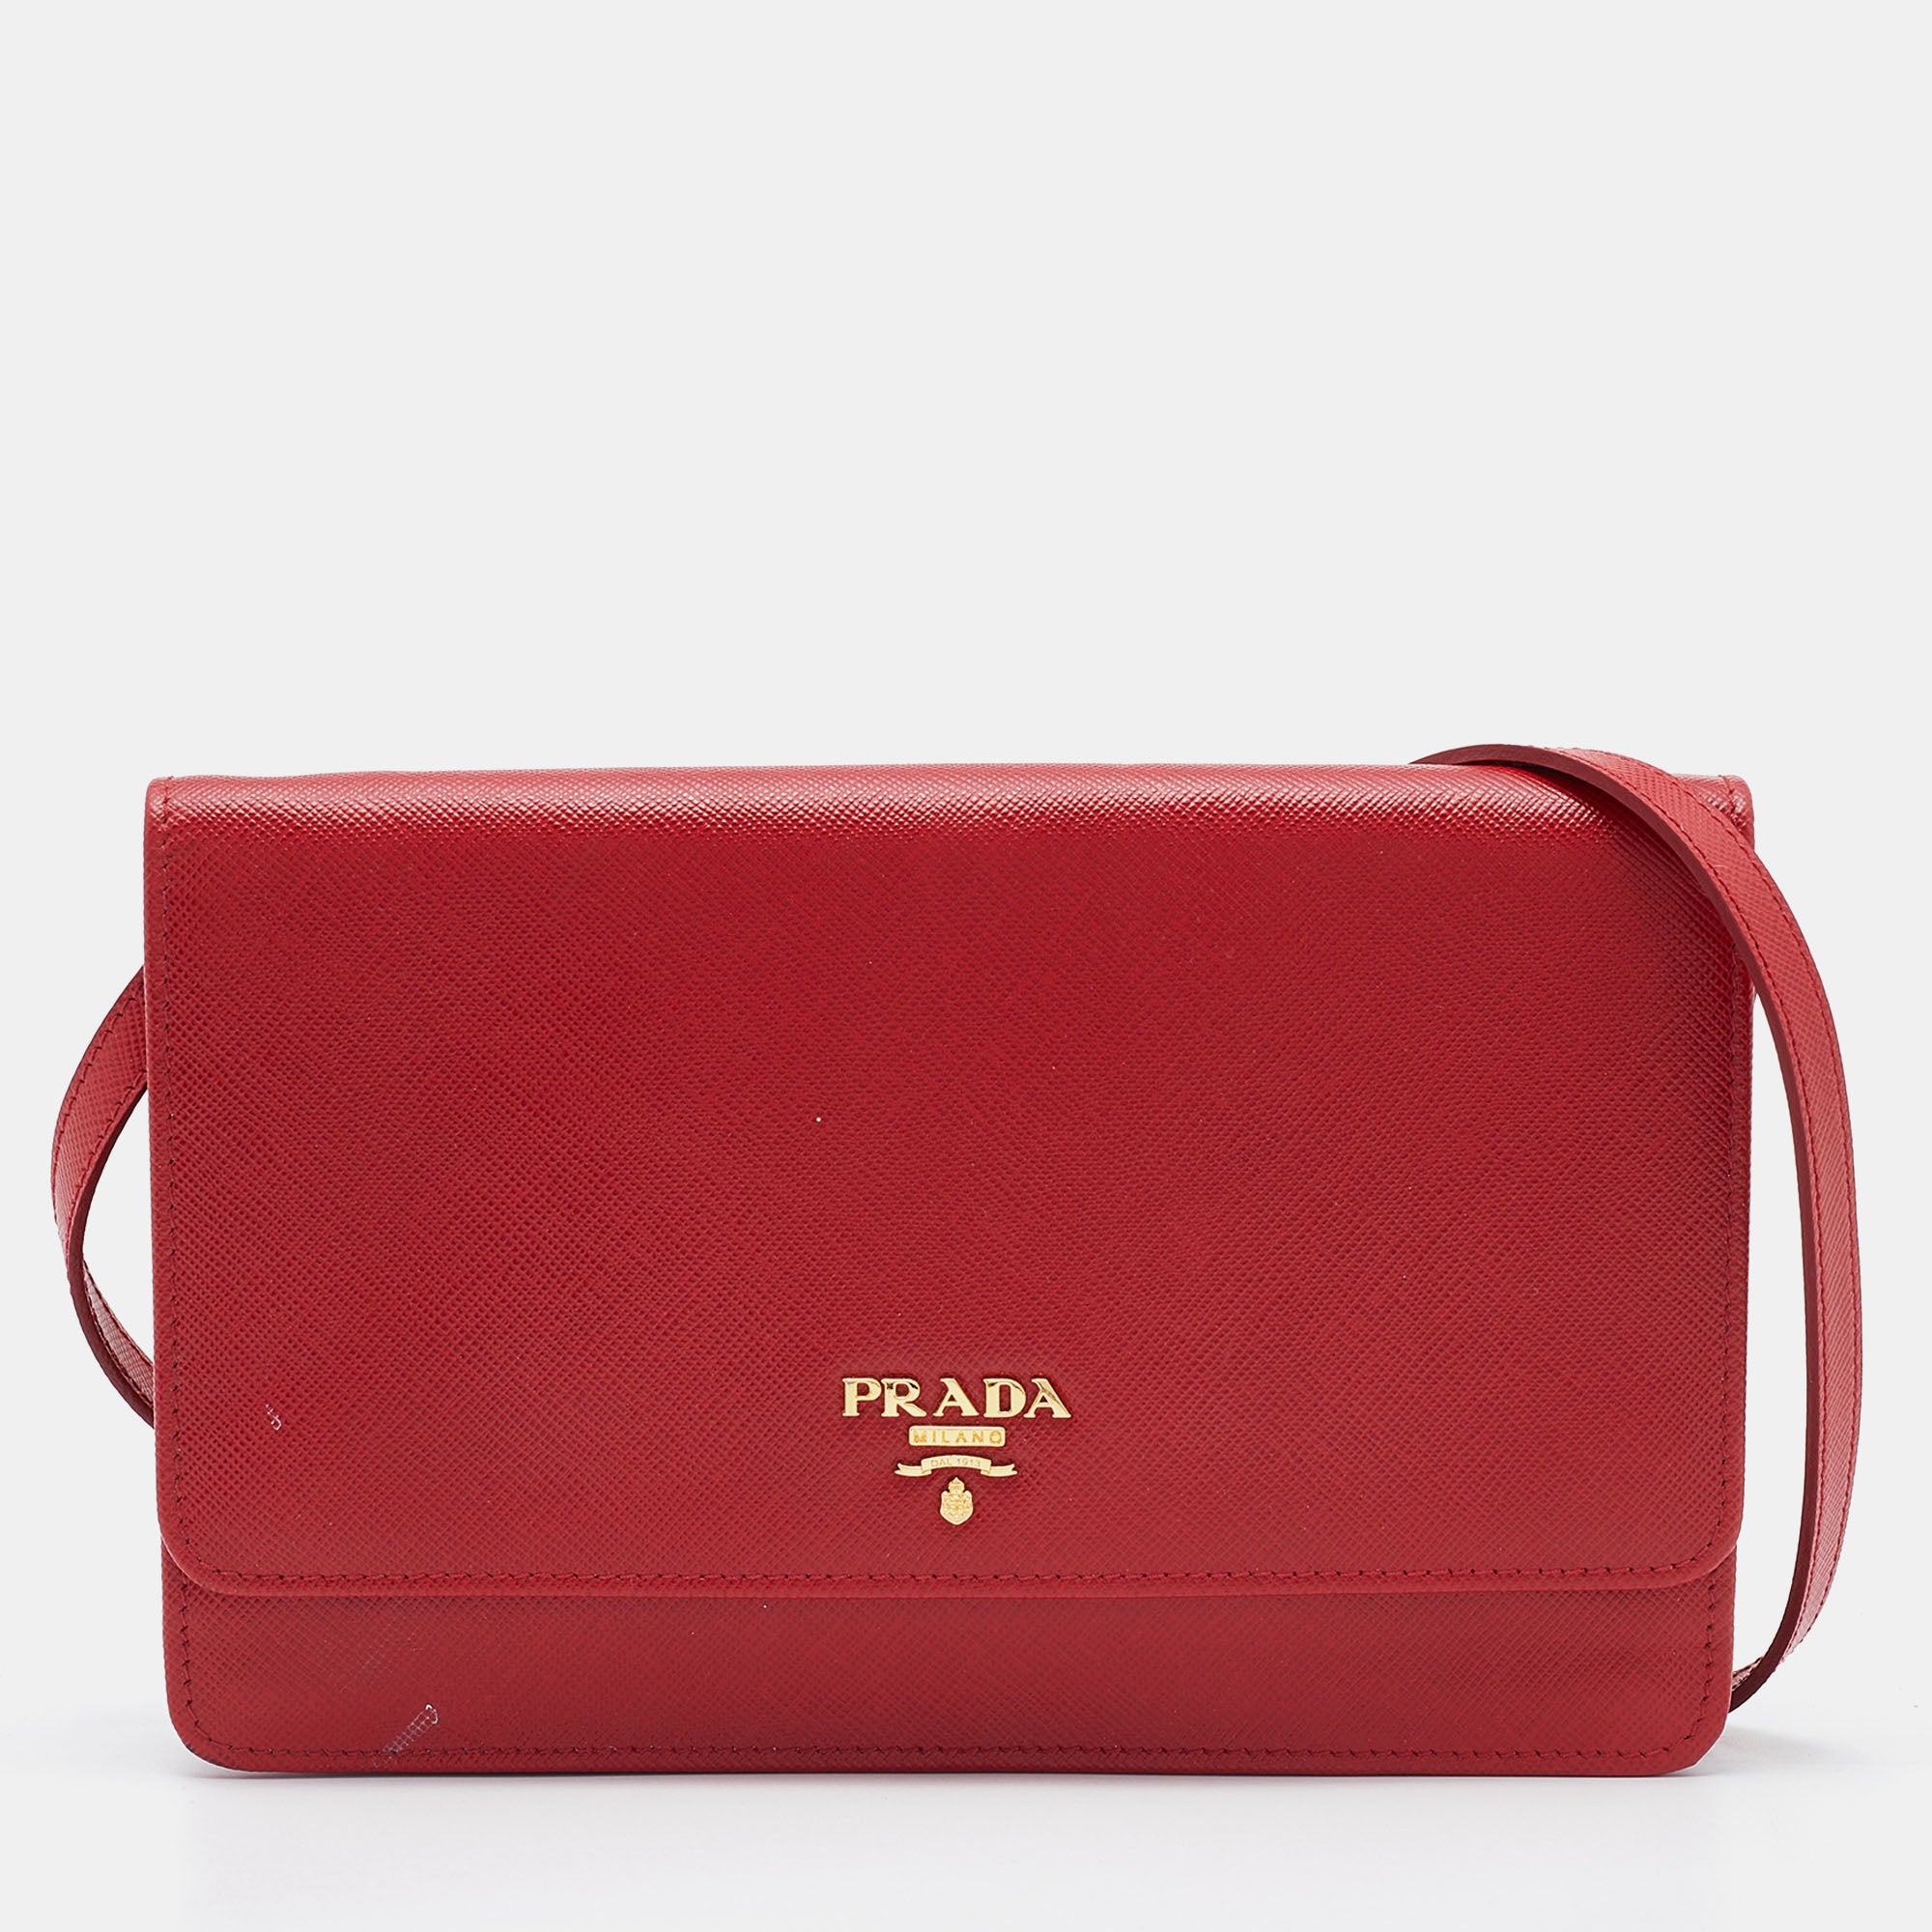 PRADA-Leather-Shoulder-Bag-Purse-FUOCO-Red-1NF674 – dct-ep_vintage luxury  Store